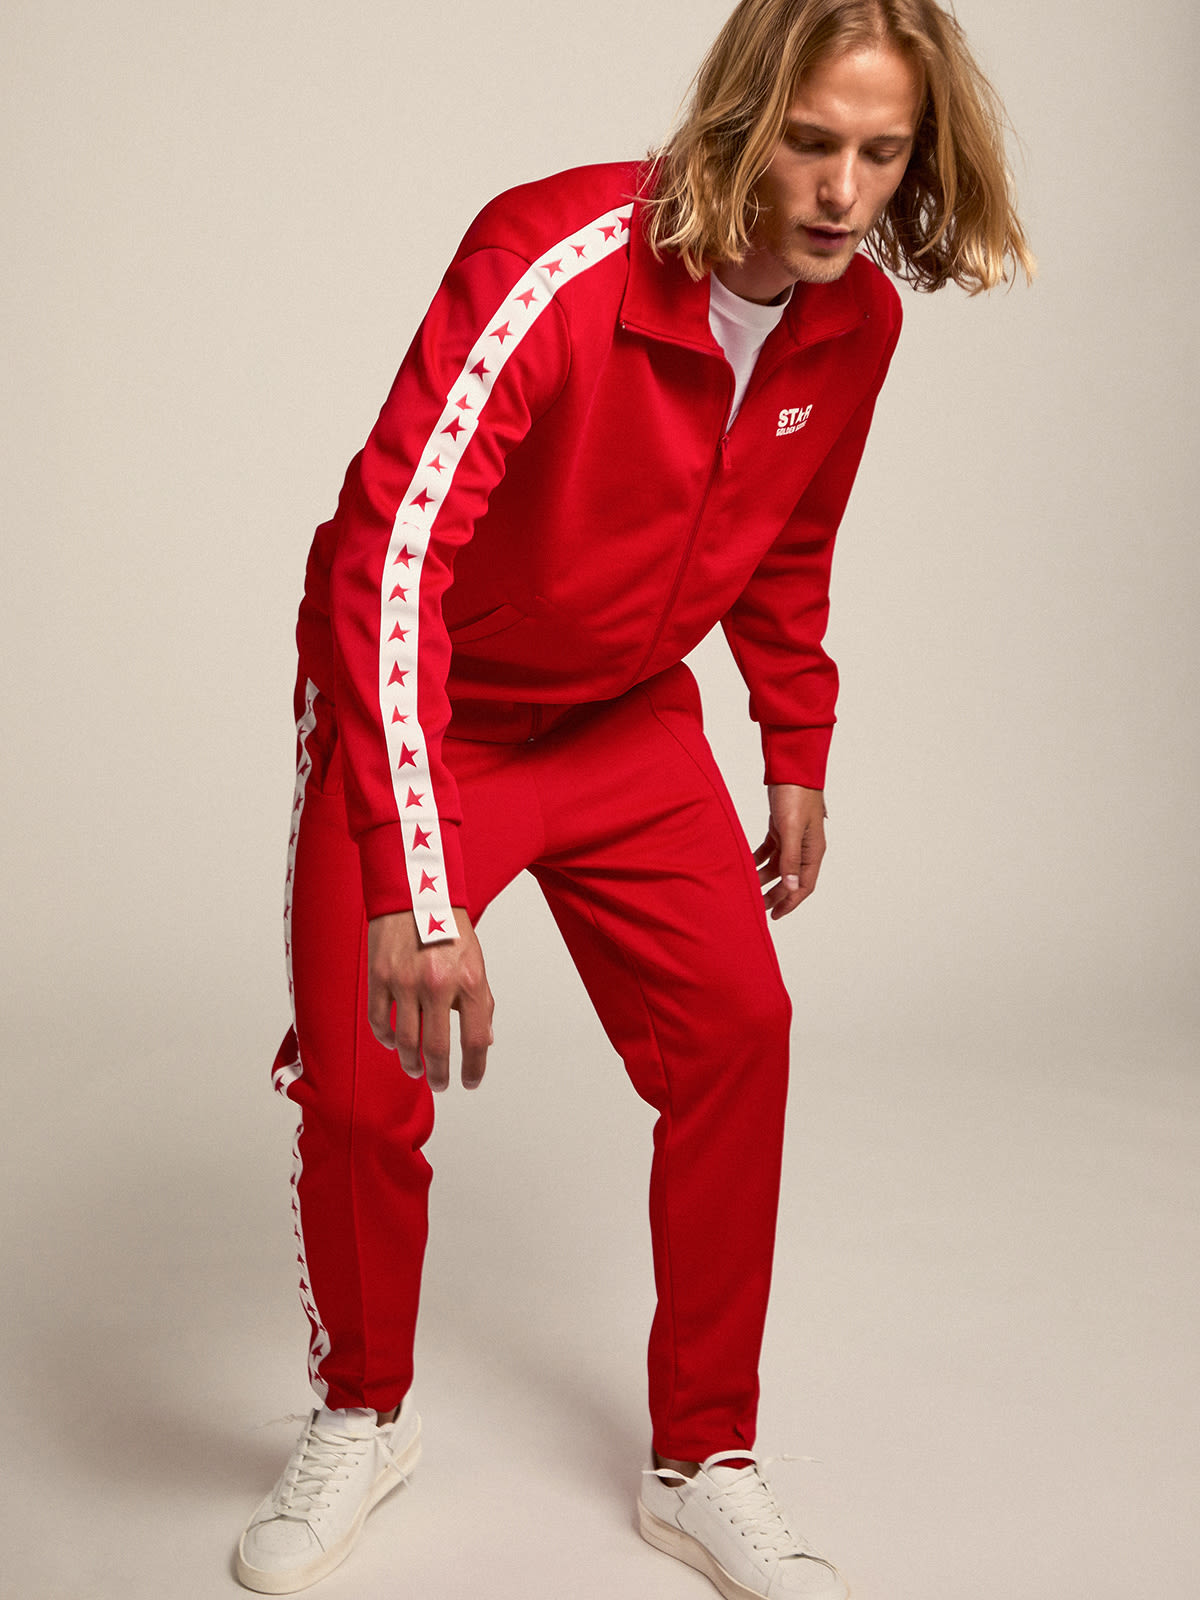 Golden Goose - Men's red joggers with stars on the sides in 